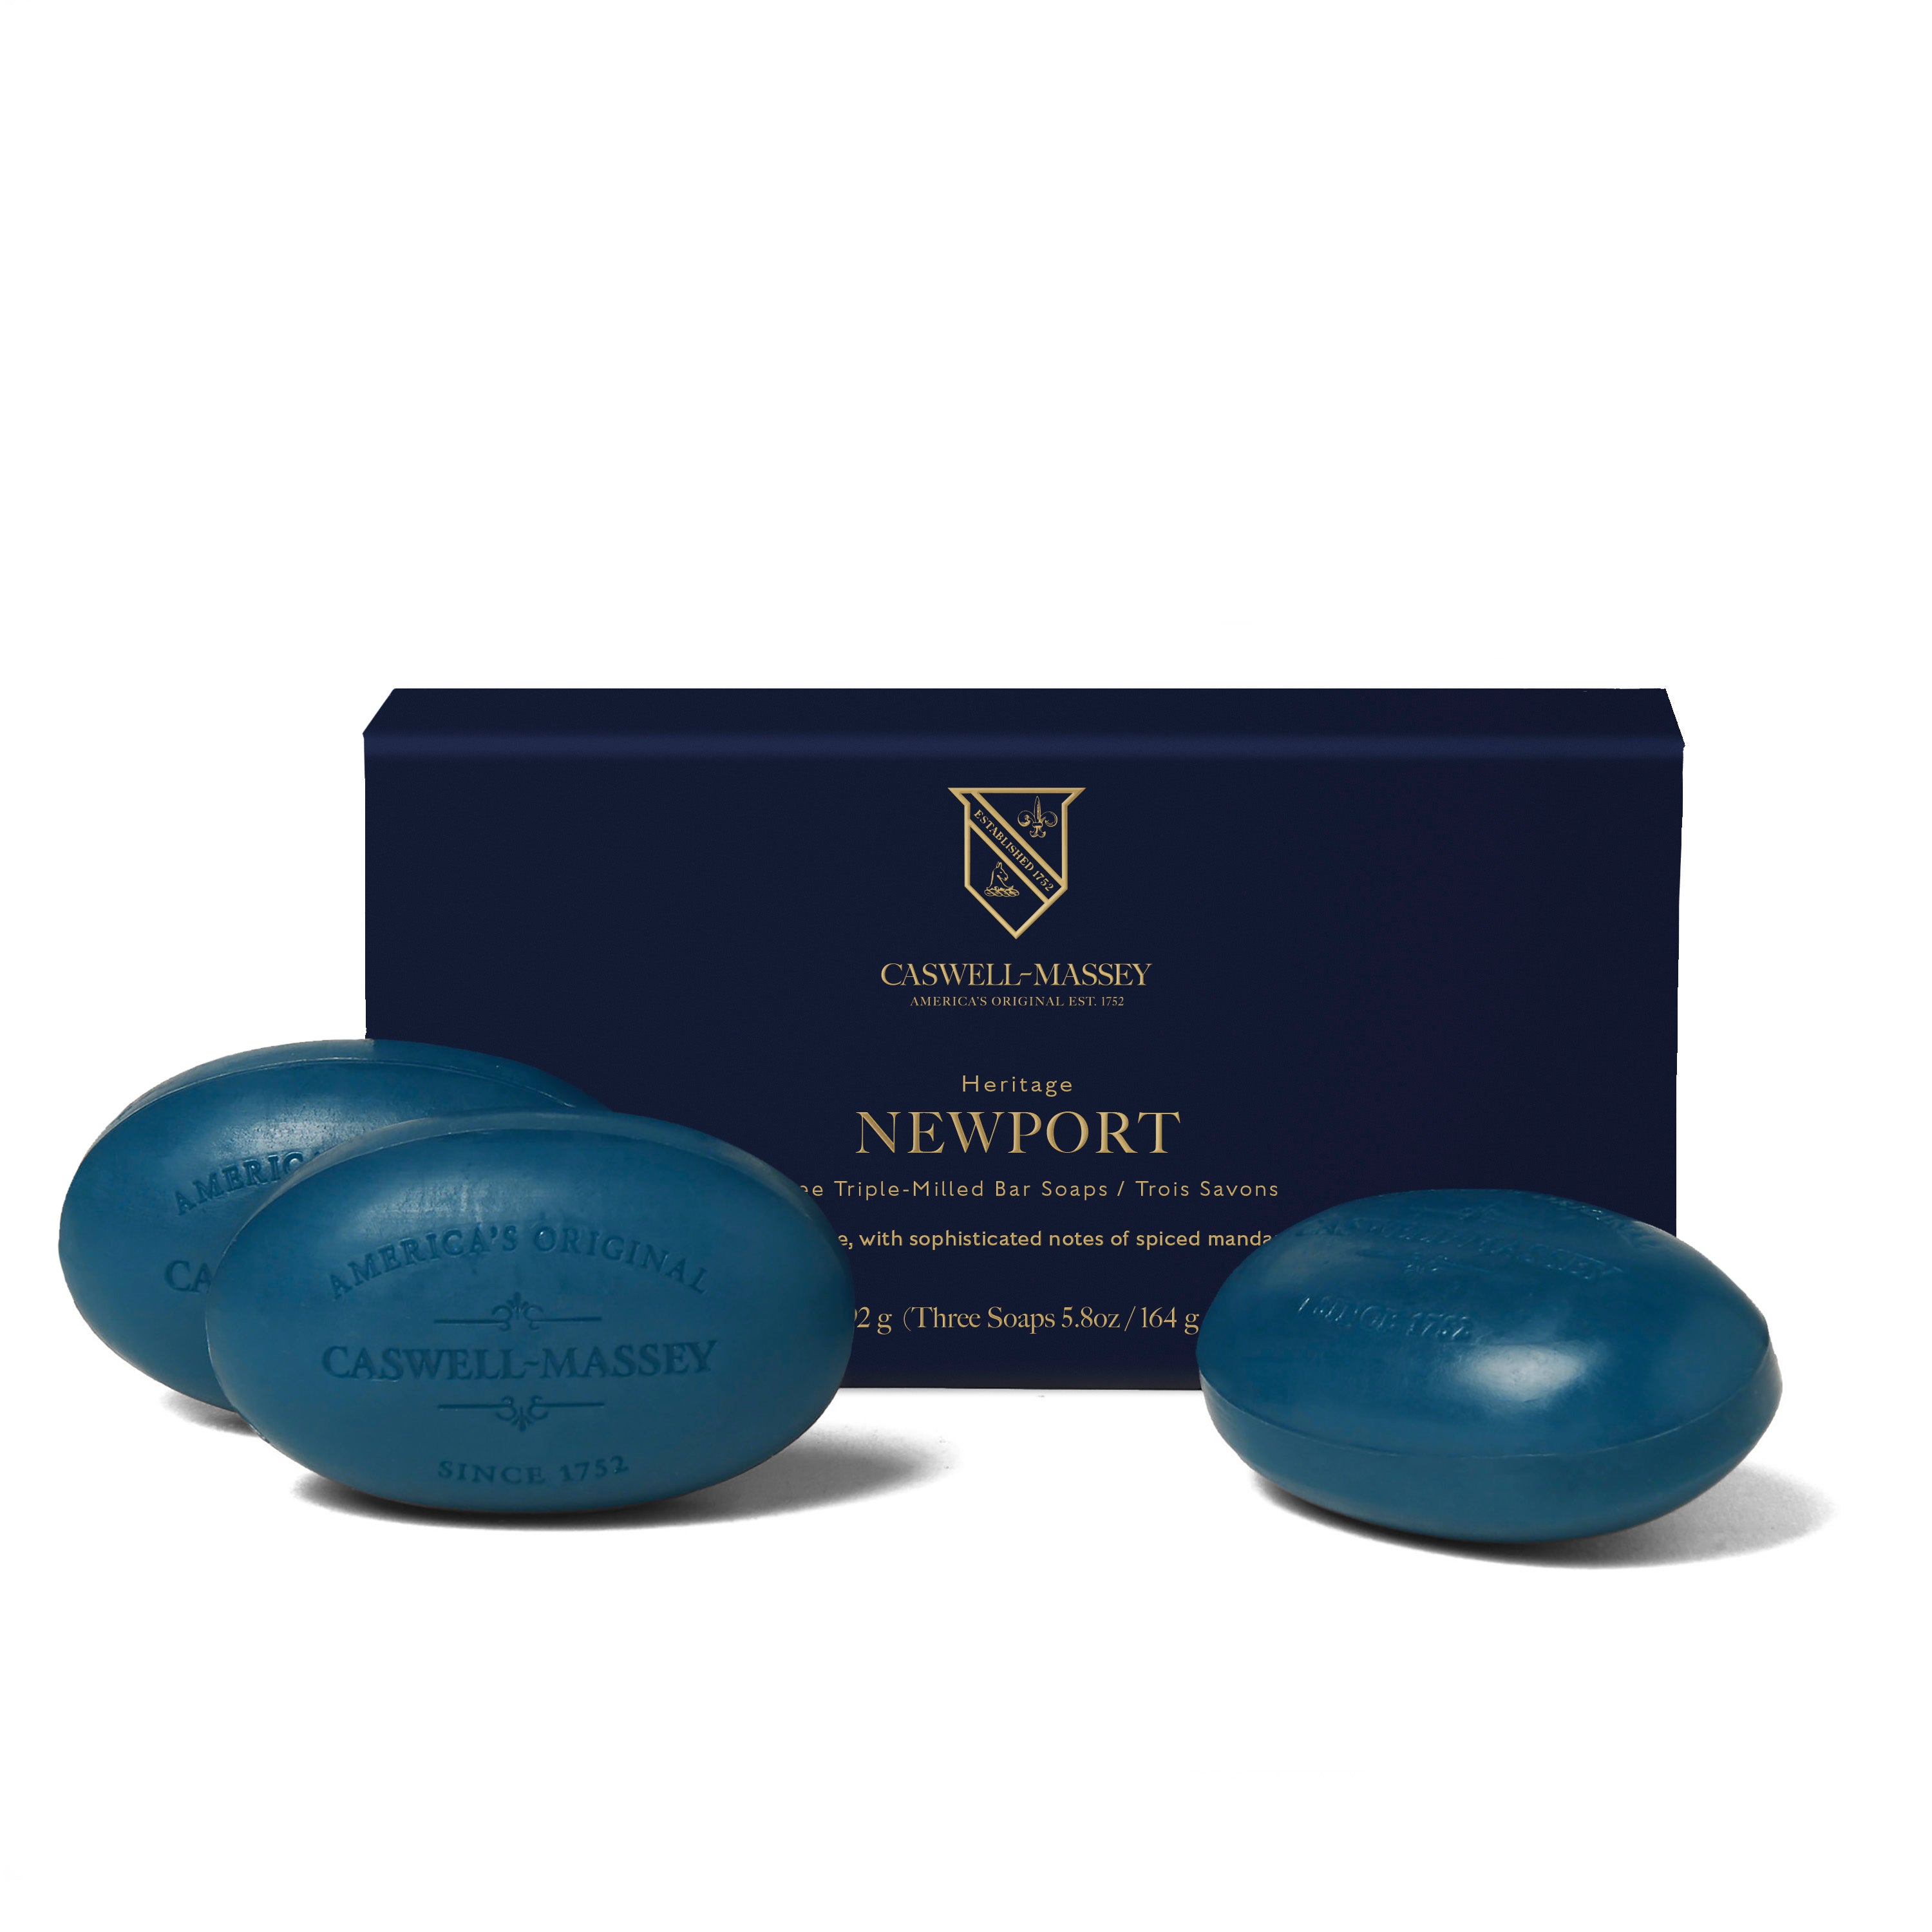 Caswell-Massey® Heritage Newport 3-Soap Set shown with navy blue gift box alongside navy blue bar soaps